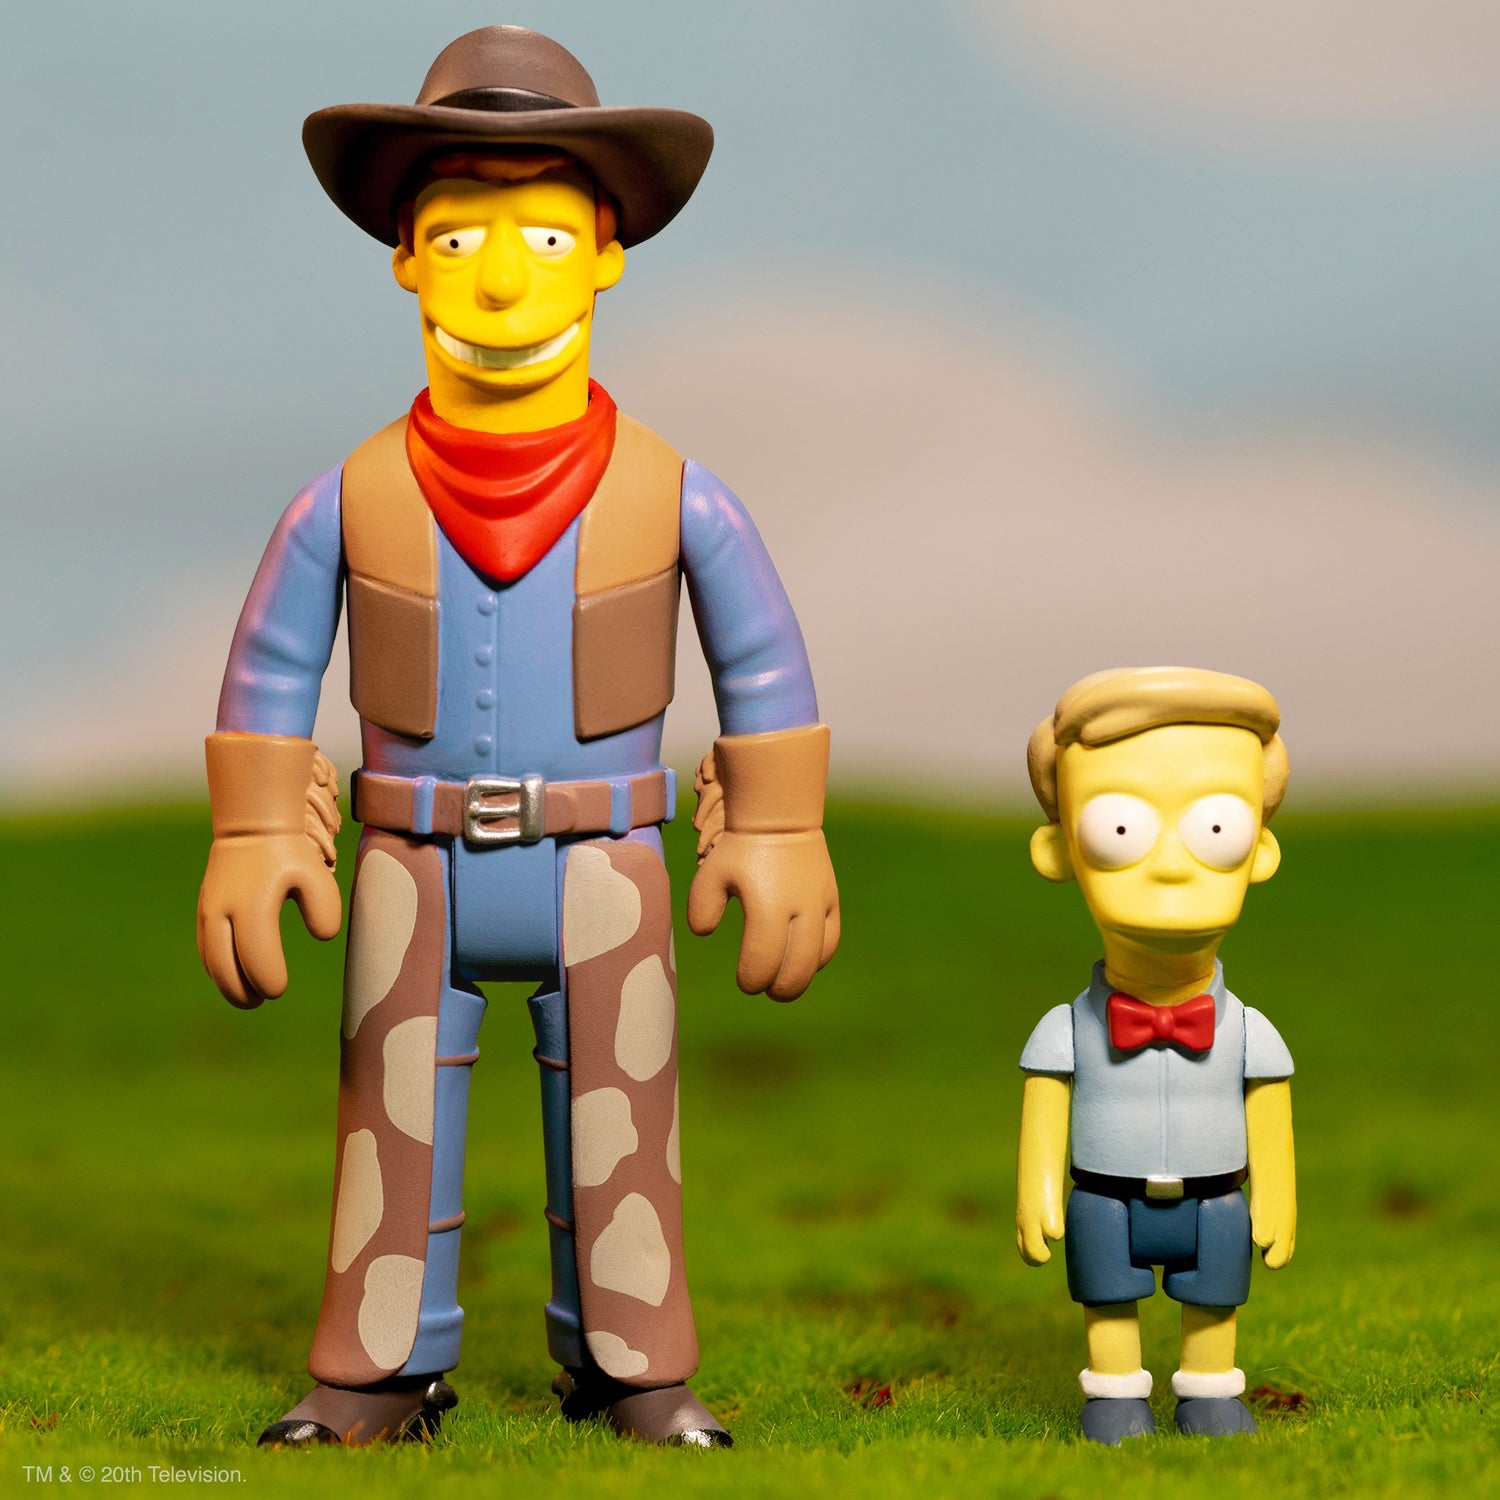 Super7 The Simpsons ReAction W2 - Troy McClure "Meat and You: Partners in Freedom"